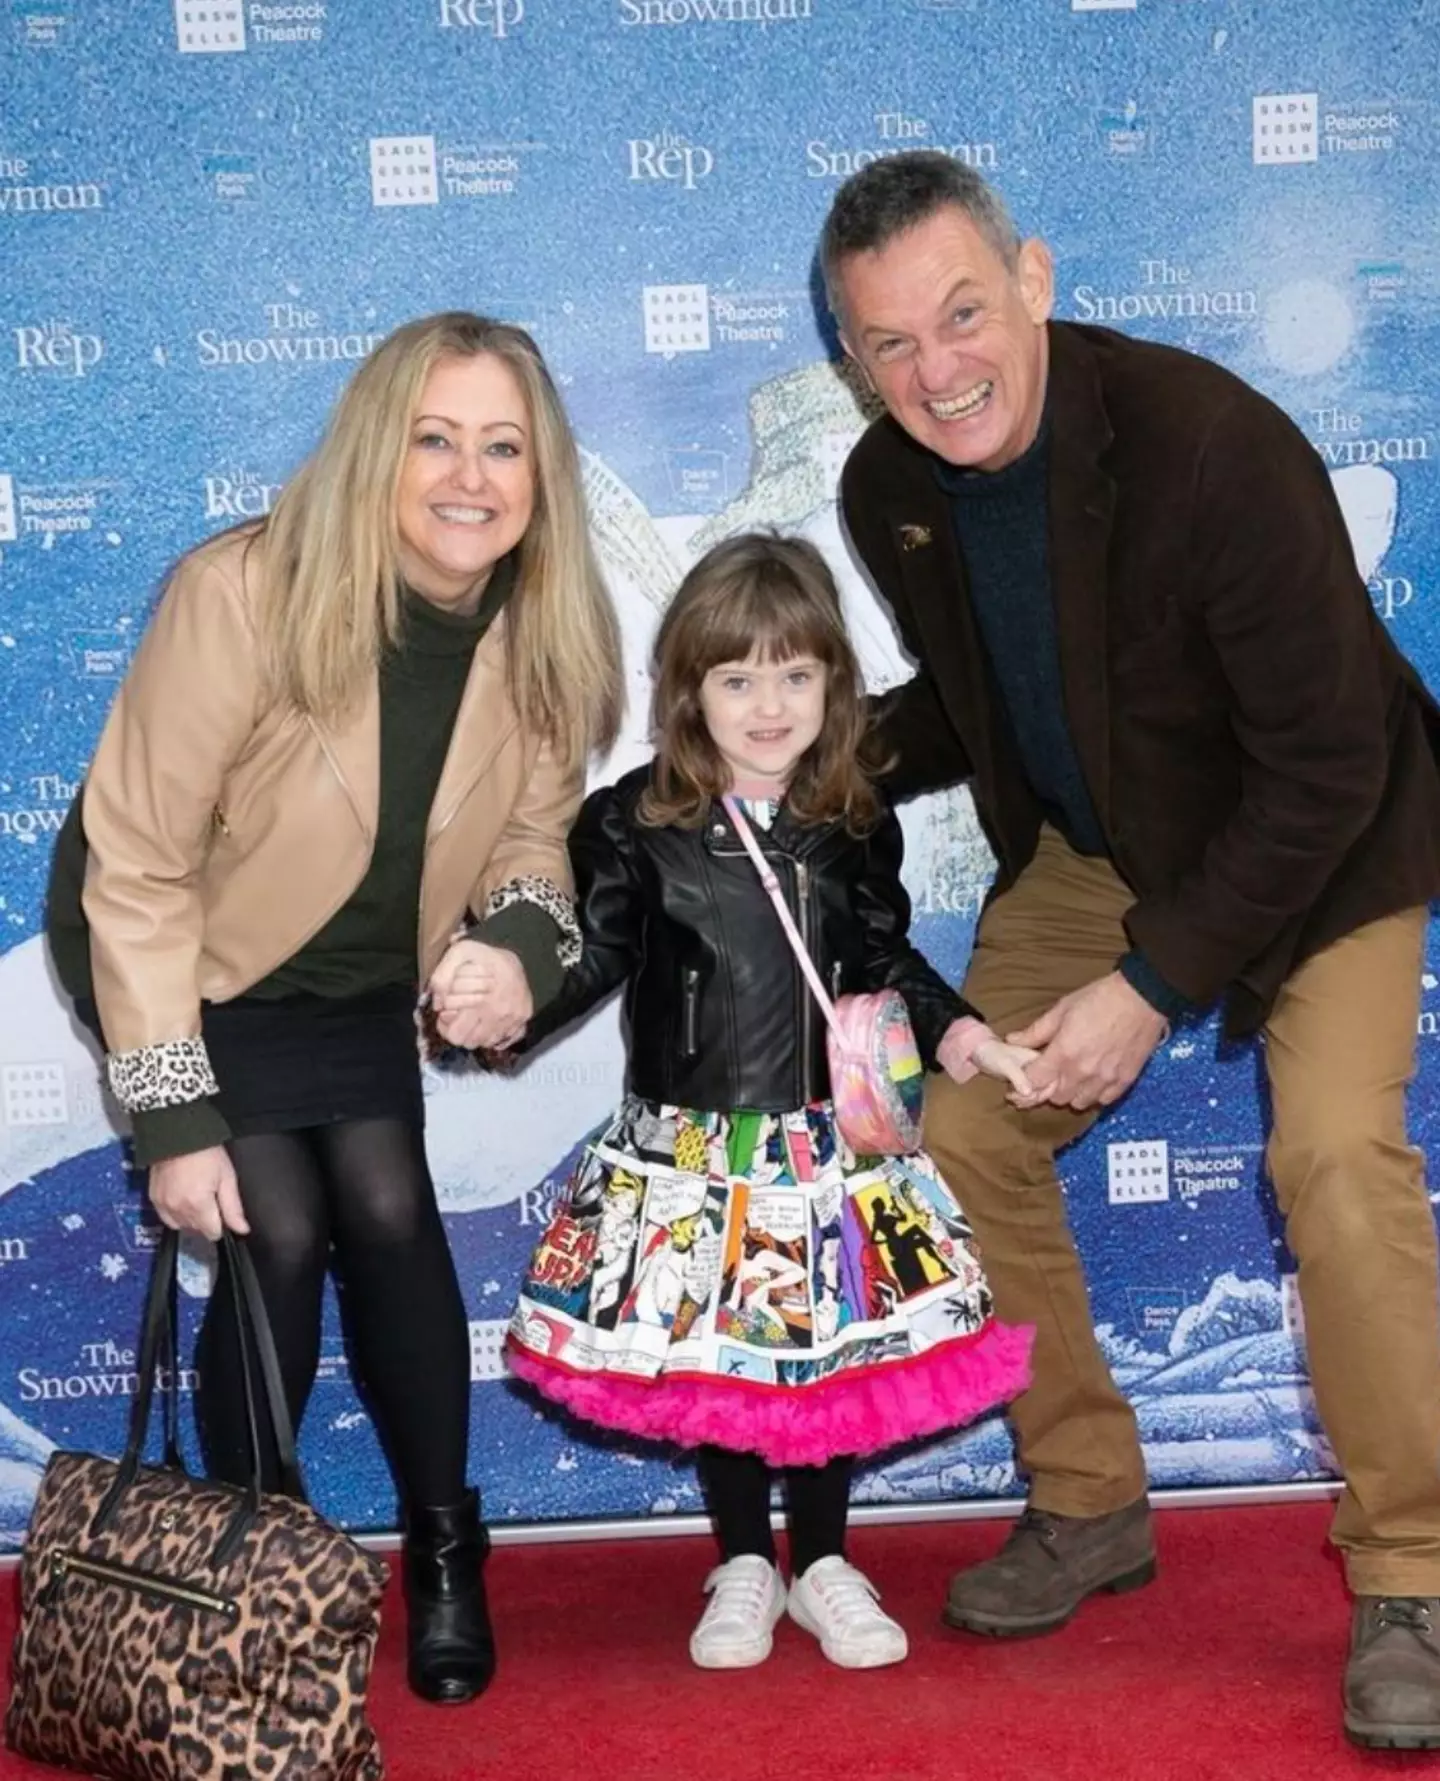 Matthew Wright won't be spending Christmas with his wife and four-year-old daughter because the holiday 'does his head in'.